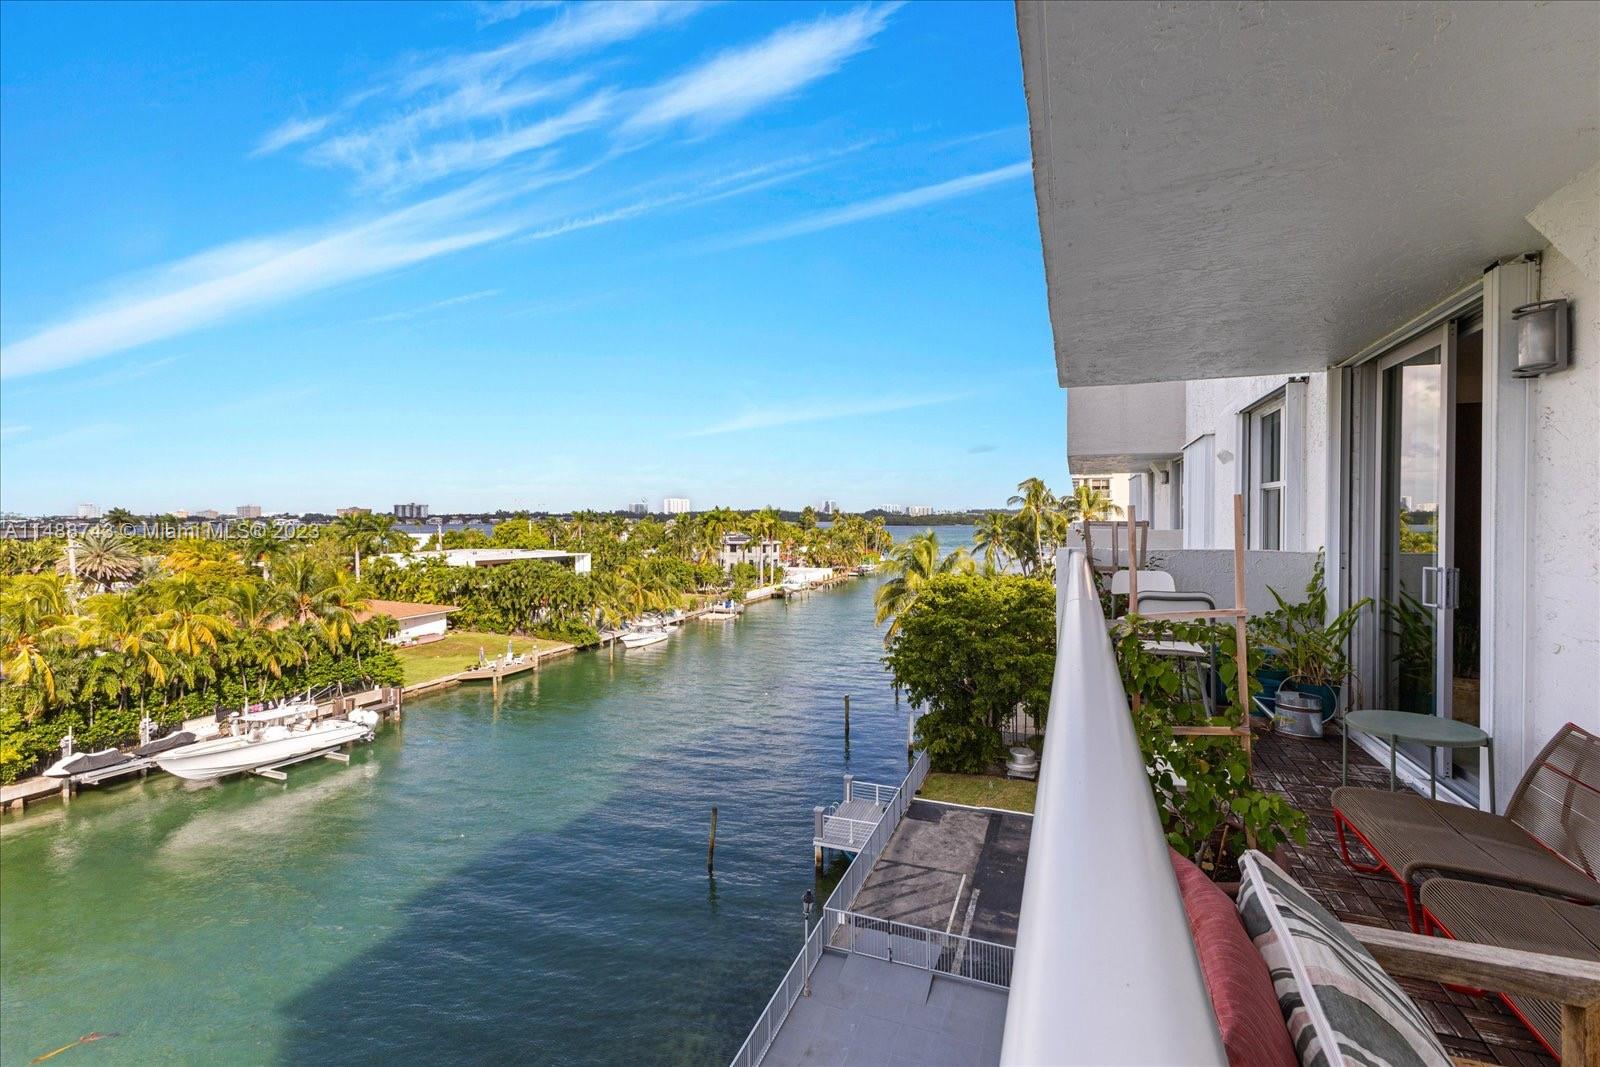 Motivated Seller! Beautiful apartment in Bay Harbor with direct water views from living room, master bed & second bed. Giant master bed w/ walk-in closet and bathroom, huge balcony in the living room & second bedroom overlooking the canal. Open kitchen to living/dining area, impact windows, tile floors, lots of closet space, 1 assigned storage & garage parking. Plenty of light & sunshine facing west, canal and Biscayne Bay. Walk to A+ schools, restaurants, Bal Harbor shops and beach. Building has completed/passed its 40-year inspection & been remodeled with glass balconies, new roof! Building amenities include a salt pool, gym, sauna, doorman, private charging station on site and community dock with exquisite views + lots of sunlight, this is the perfect place to call home, a must see!